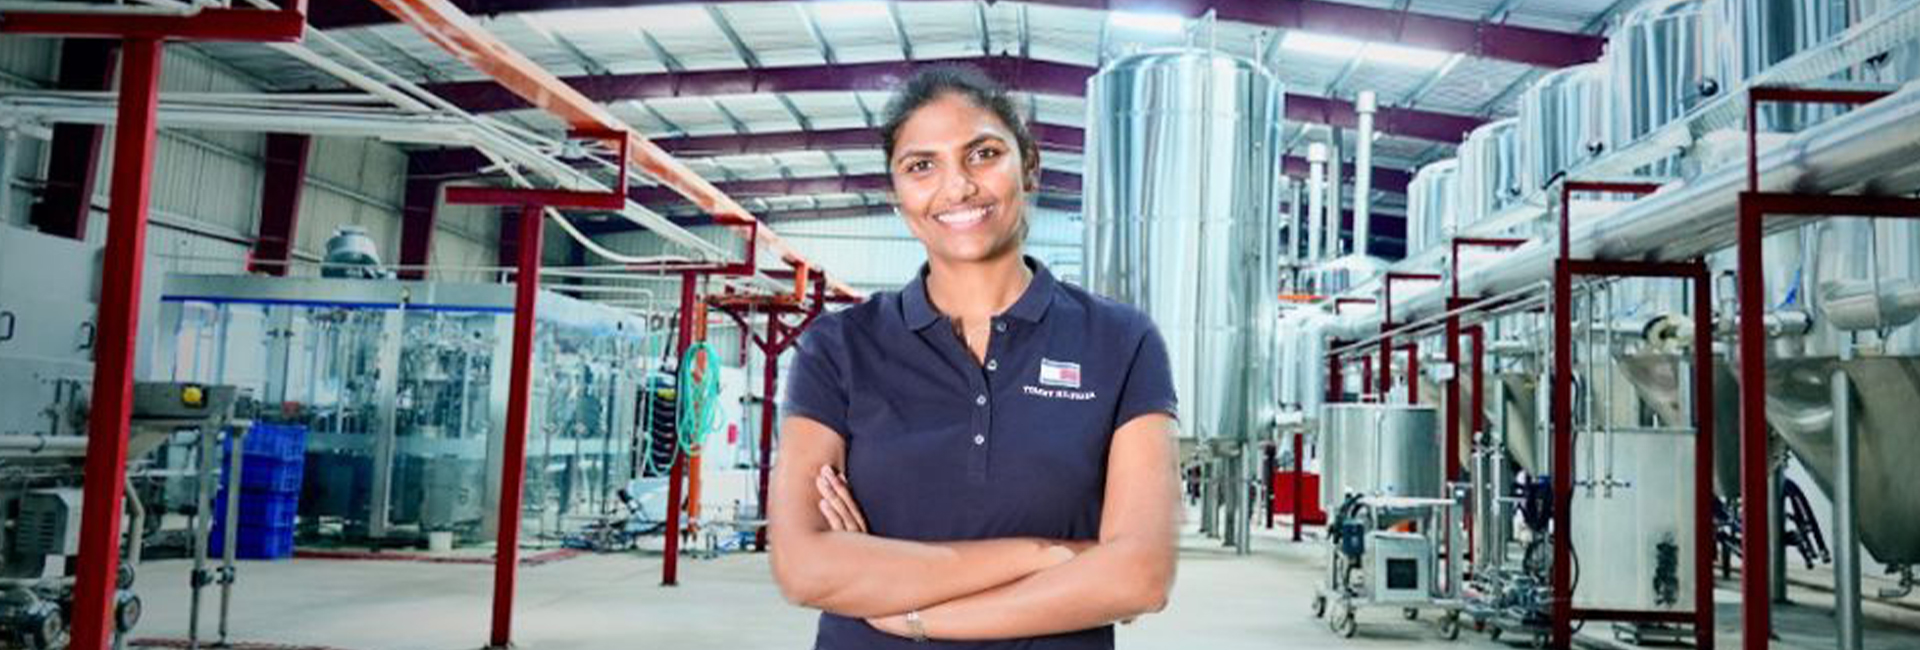 Rasagna Rao Dharmana Transforming The Indian Male Dominated Beer Industry With India’s First Woman-Led Commercial Brewery, Reybier.